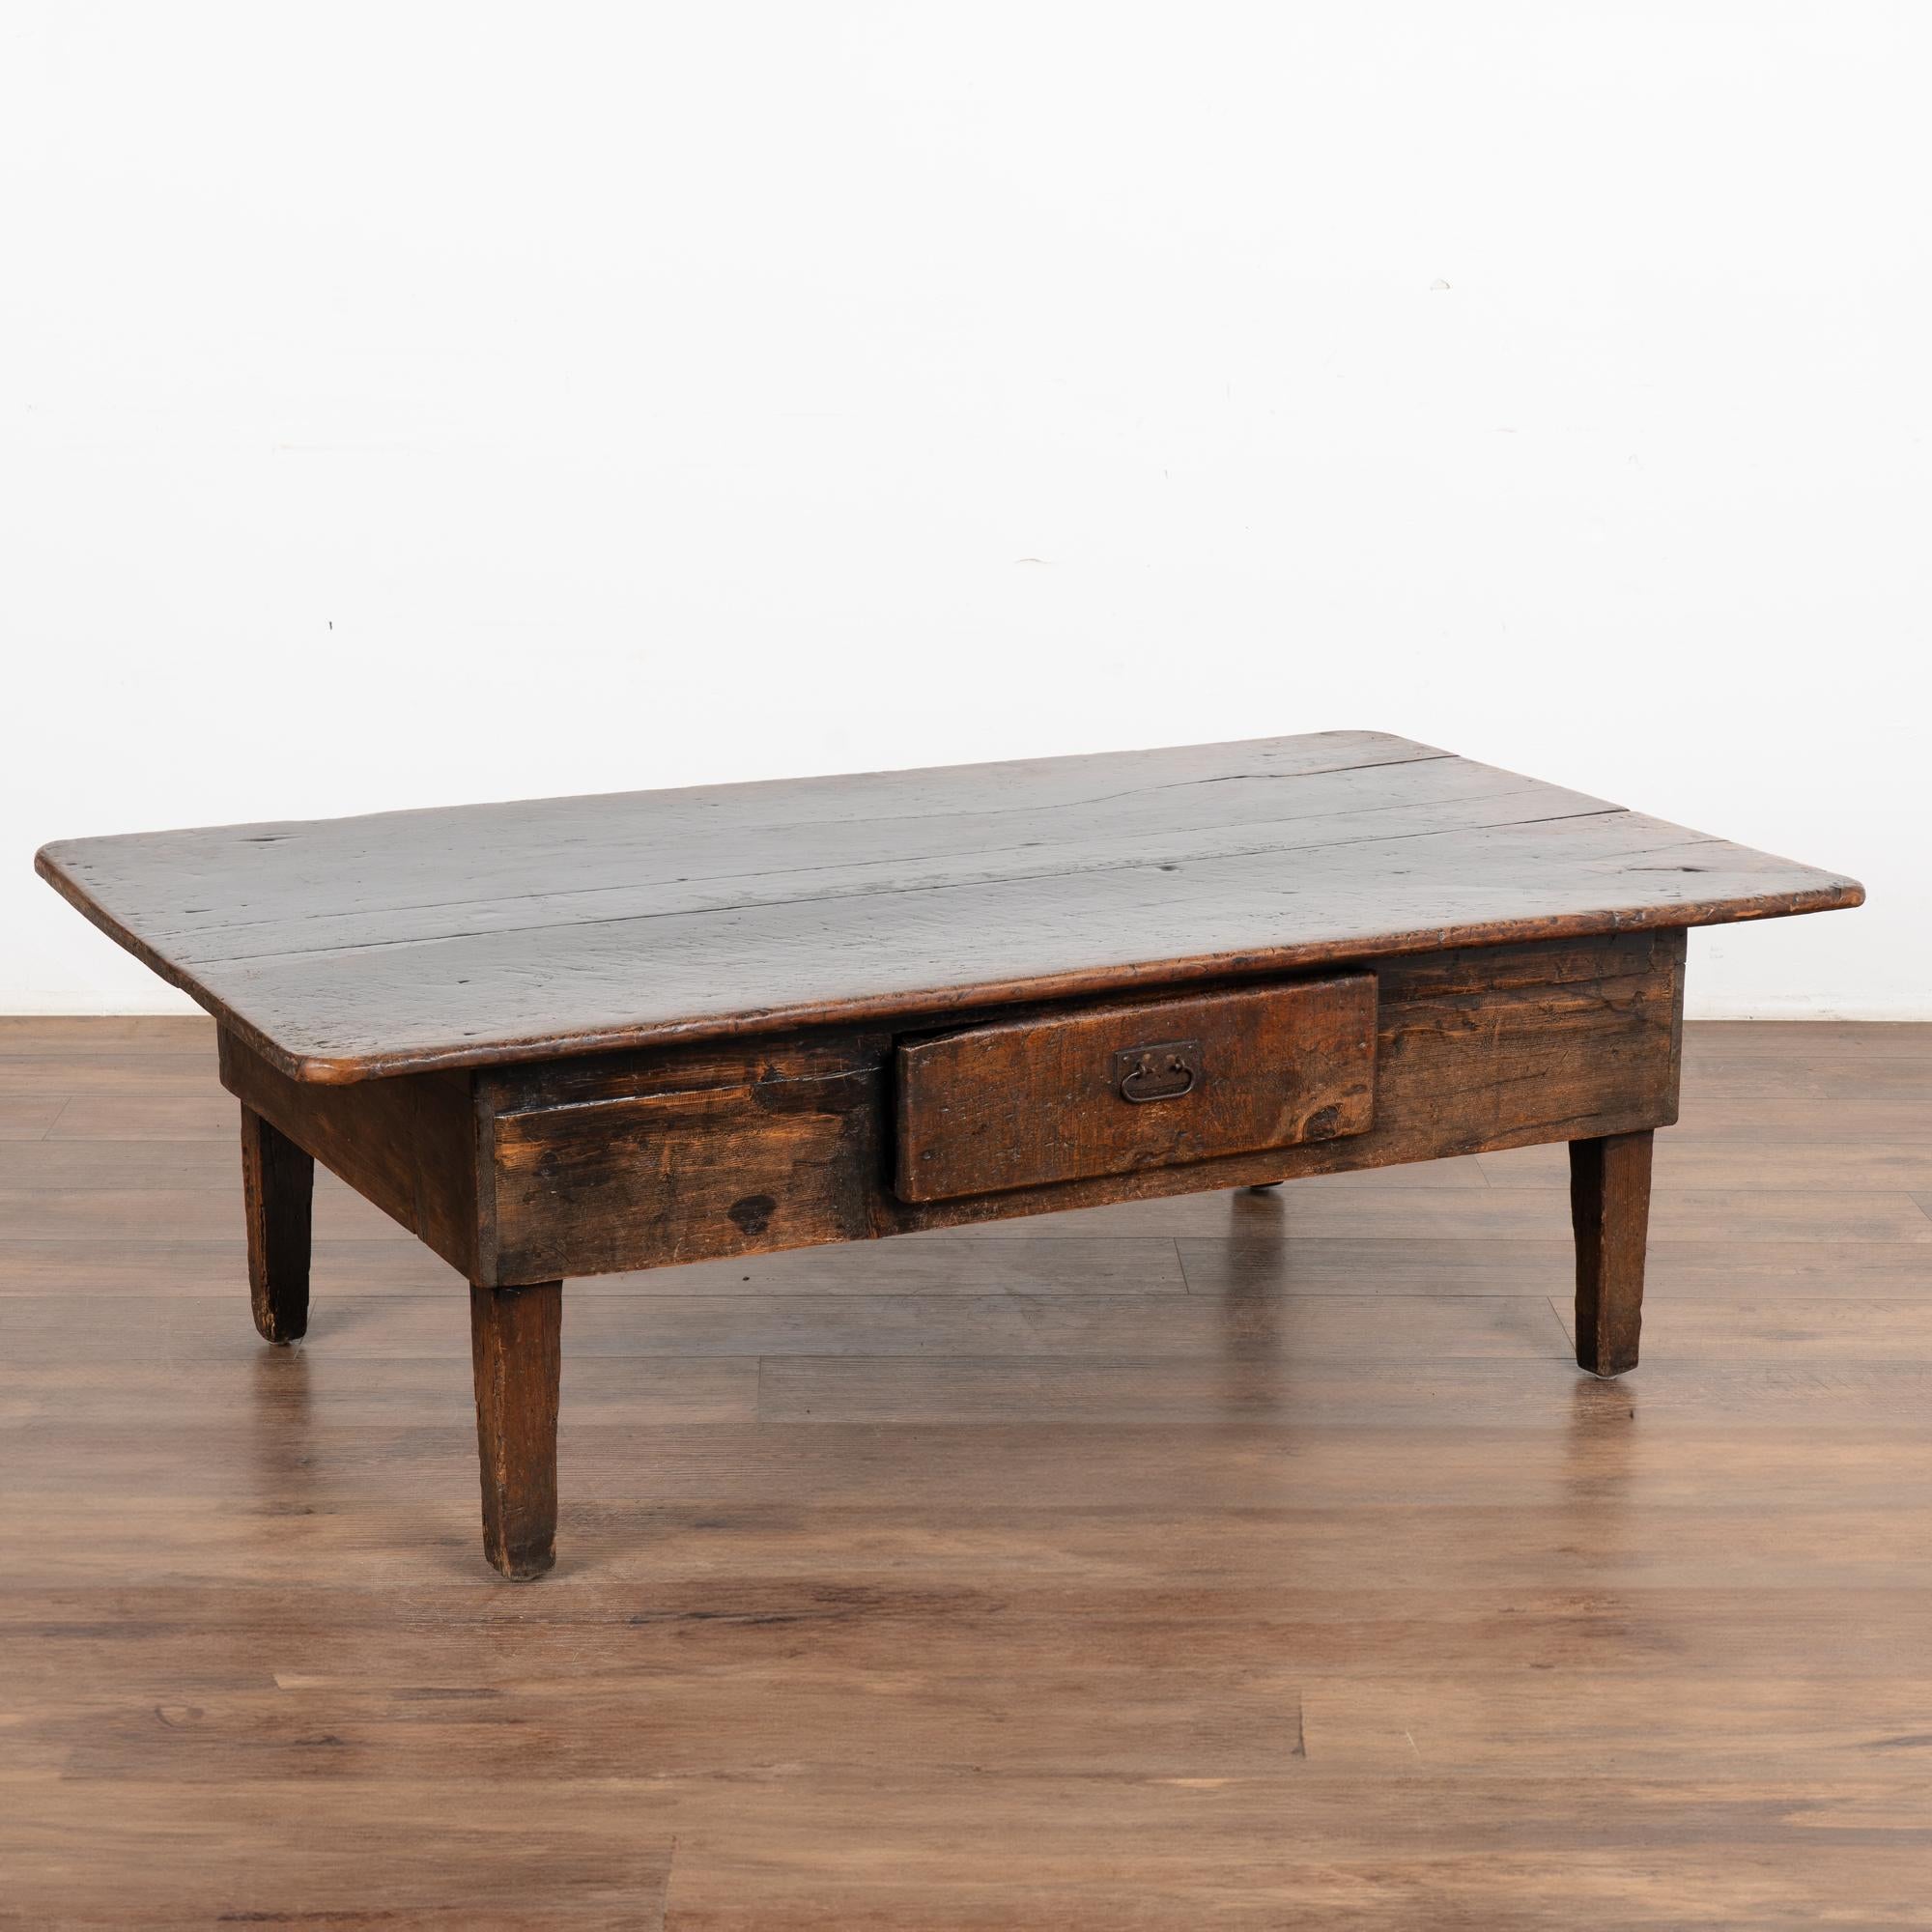 The beauty of this French country coffee table with one drawer comes from the warm aged patina of the chestnut wood. Every crack, ding, gouge, old knot and stain all add to the depth and richness found in the worn top.
Restored, strong and stable;